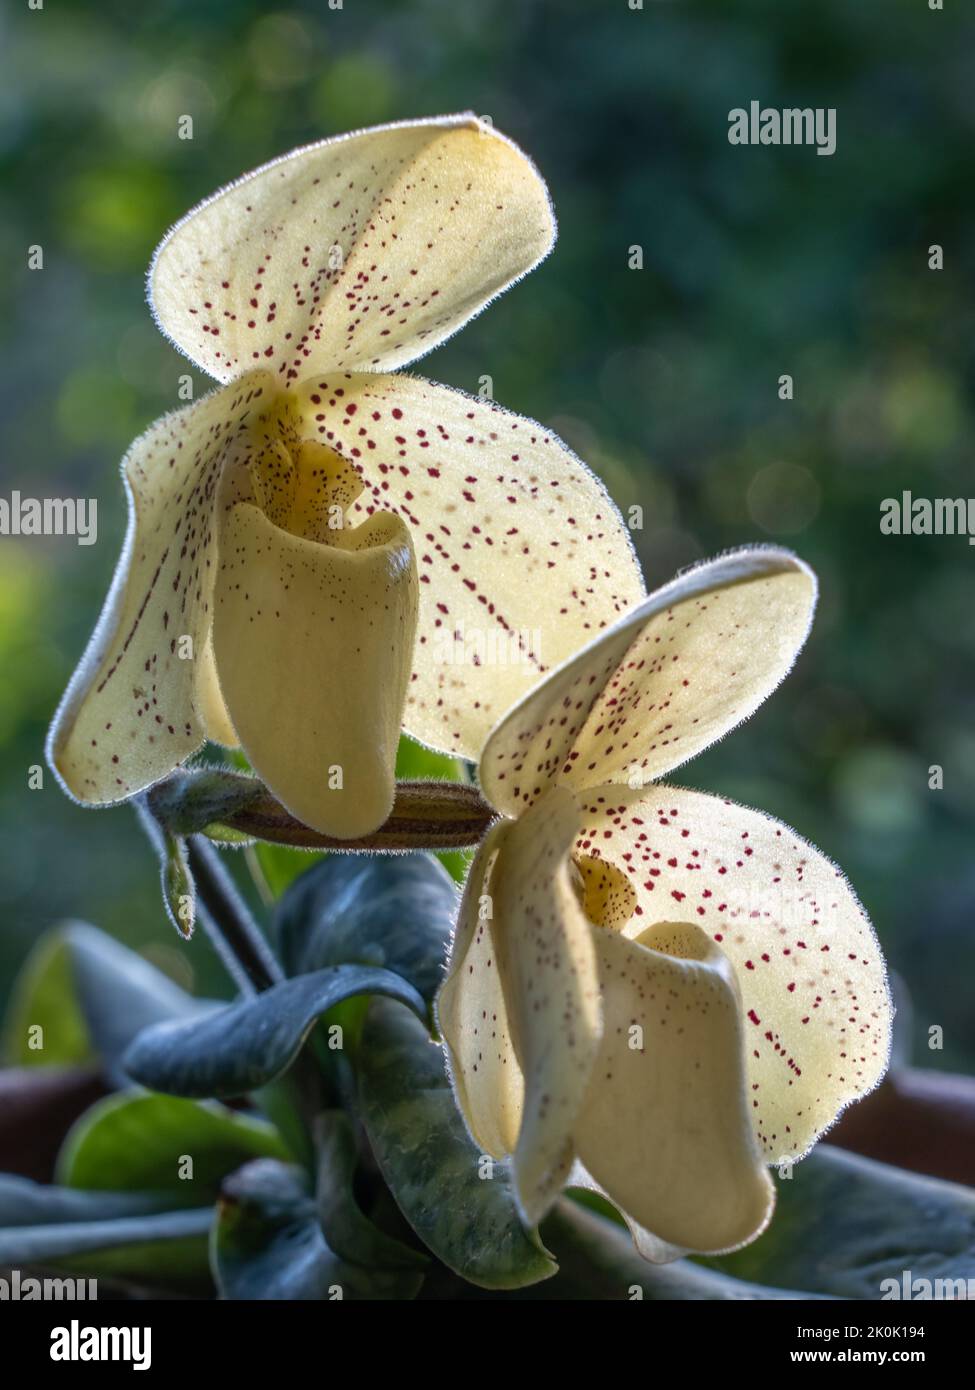 Closeup view of bright yellow and red spotted flowers of lady slipper orchid species paphiopedilum concolor backlit on natural outdoor background Stock Photo